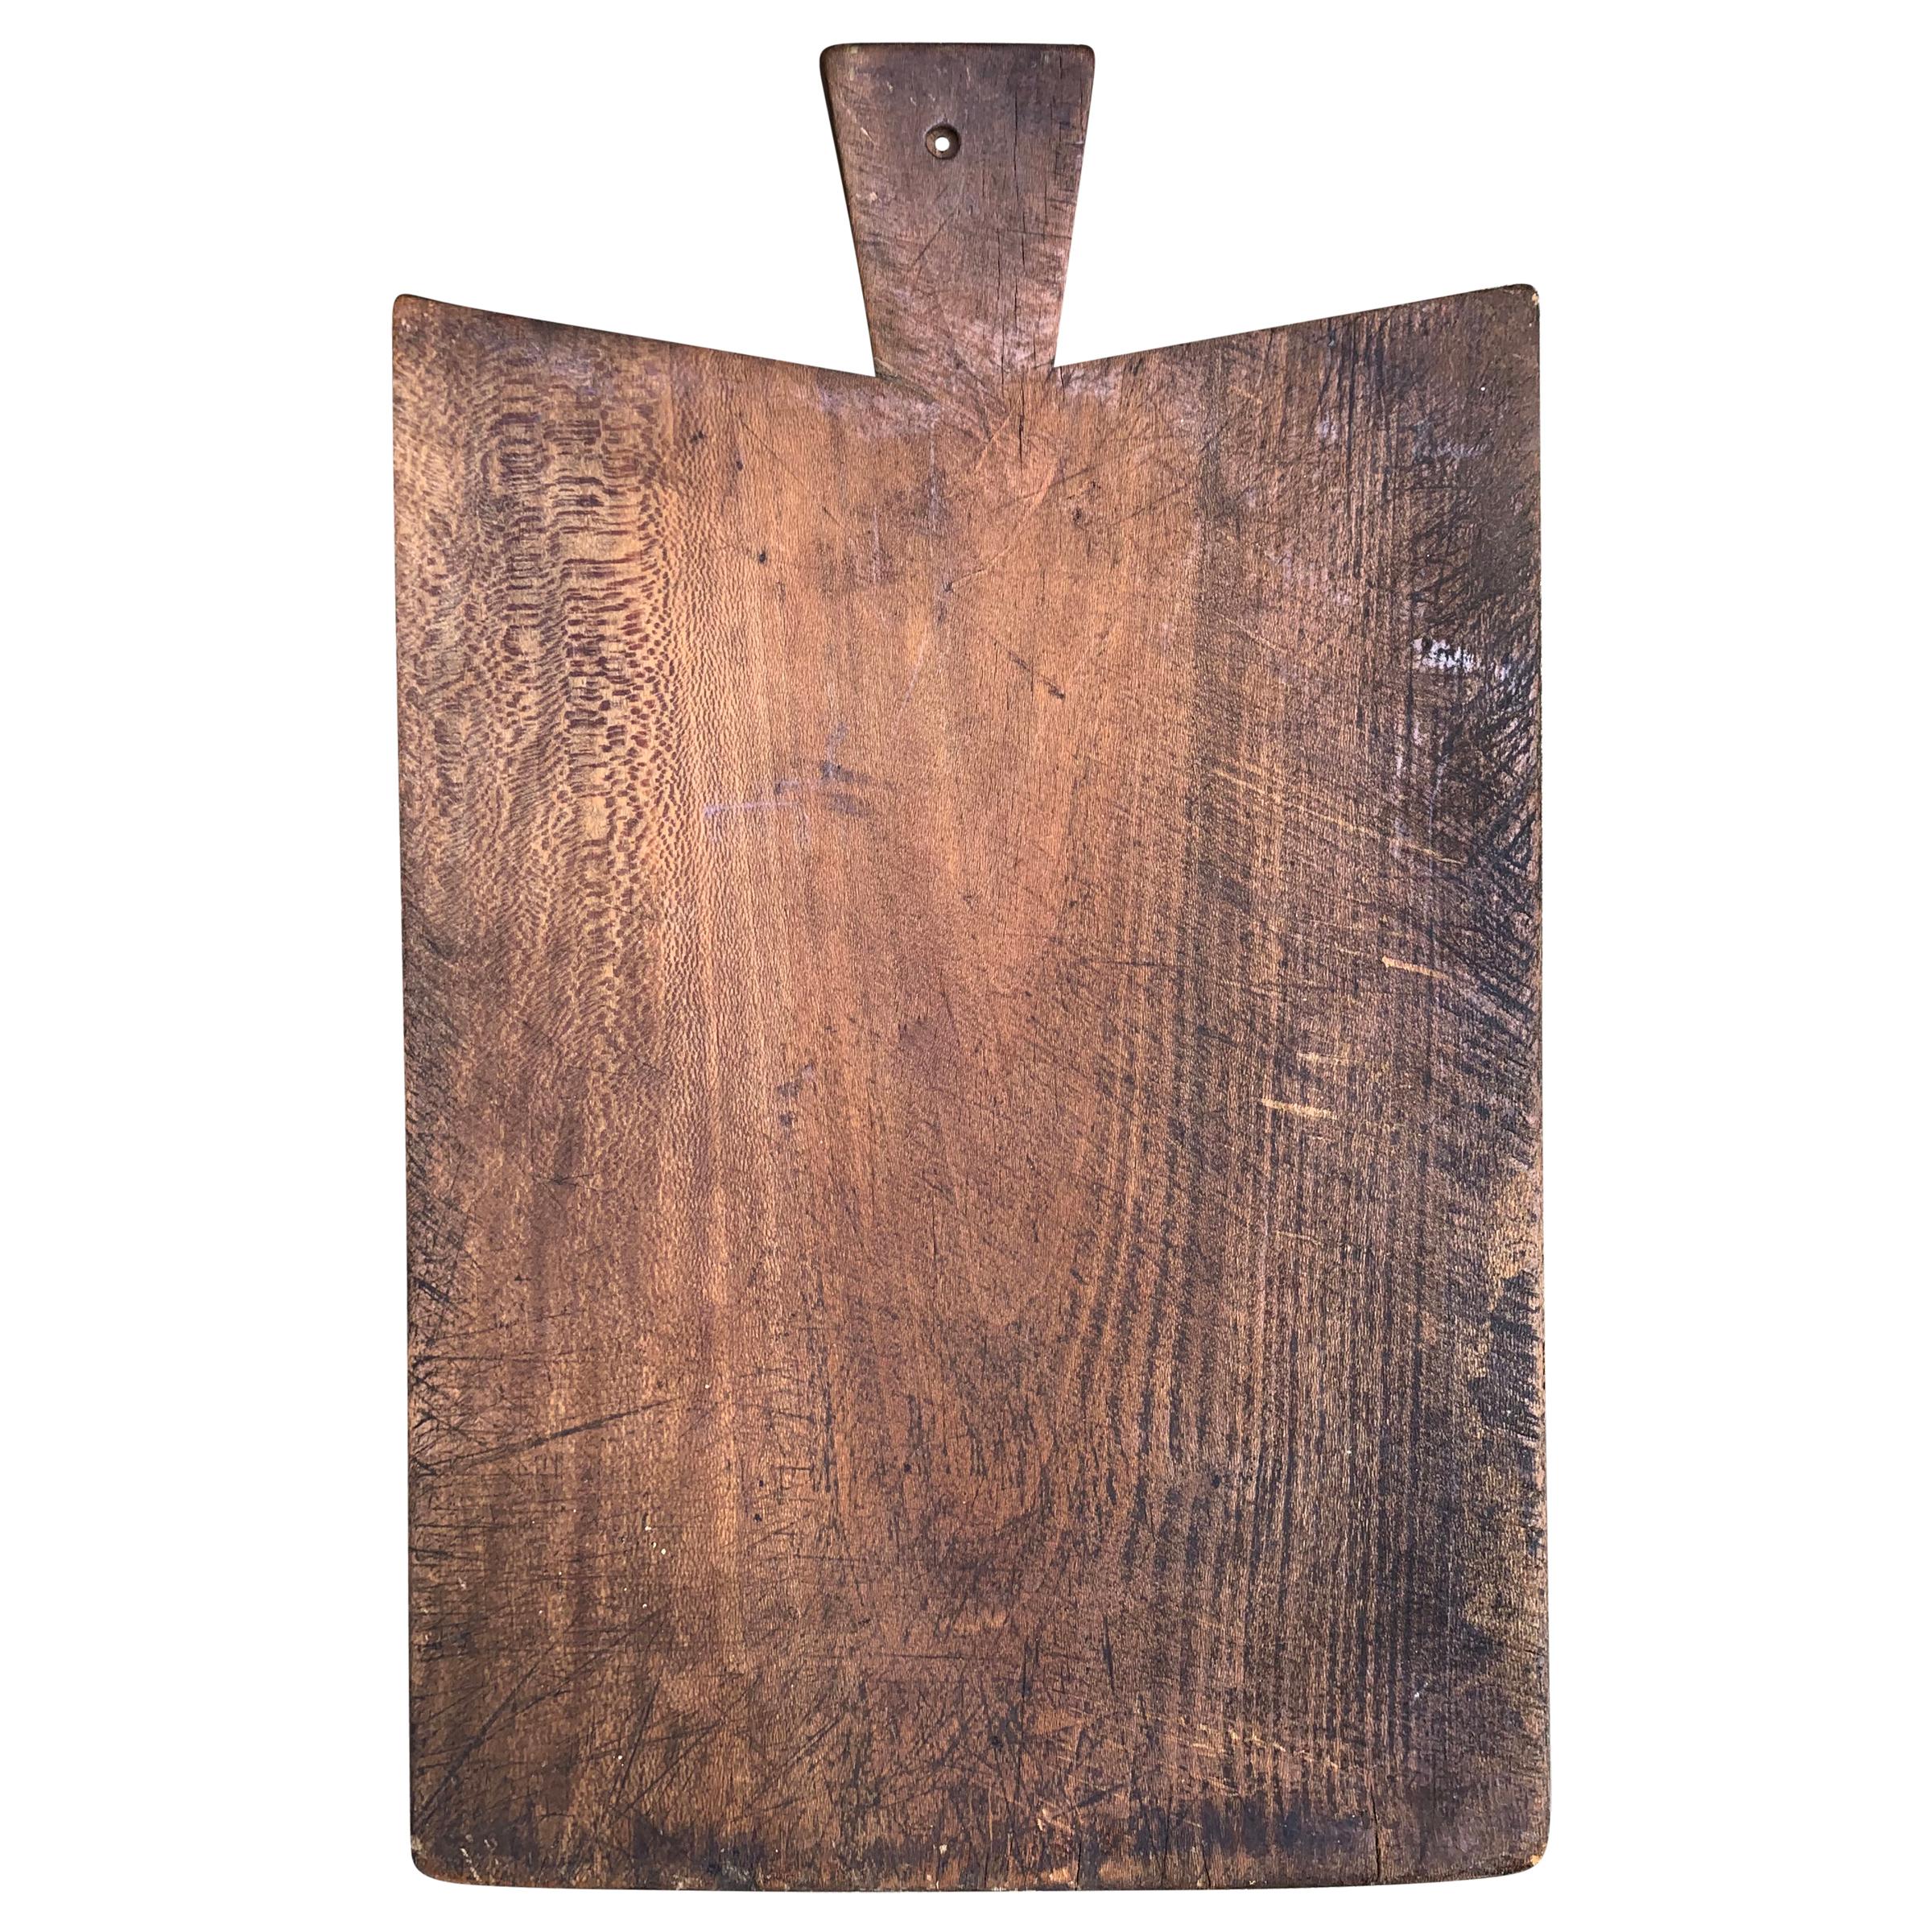 A wonderfully worn early 20th century French cutting board with a beautiful patina. All that’s missing is a selection of cheeses, charcuterie, and your guests.